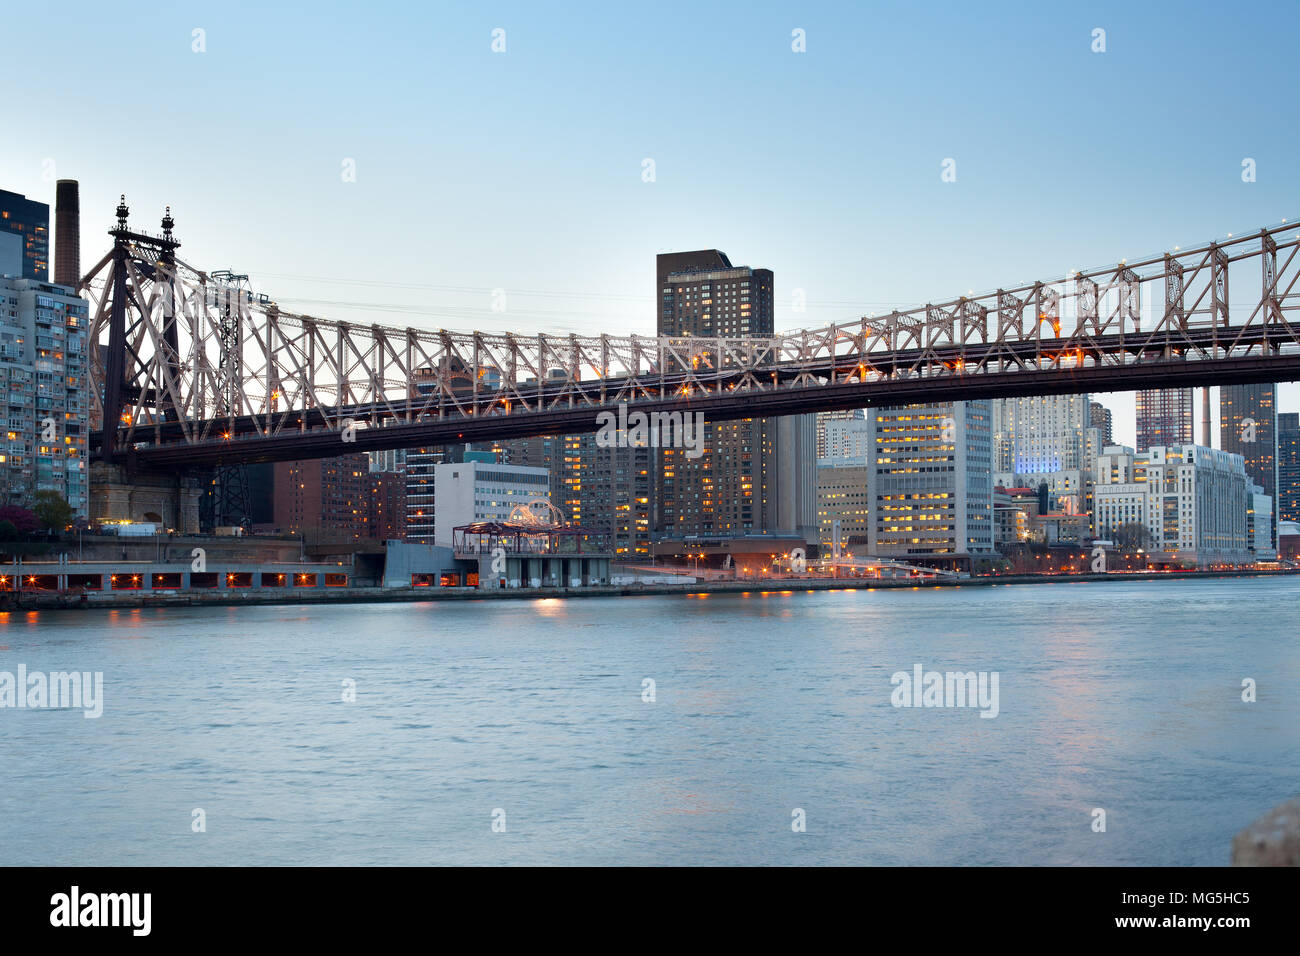 Queensboro Bridge over the East River and Upper East Side, Manhattan, New York City, NY, USA Stock Photo